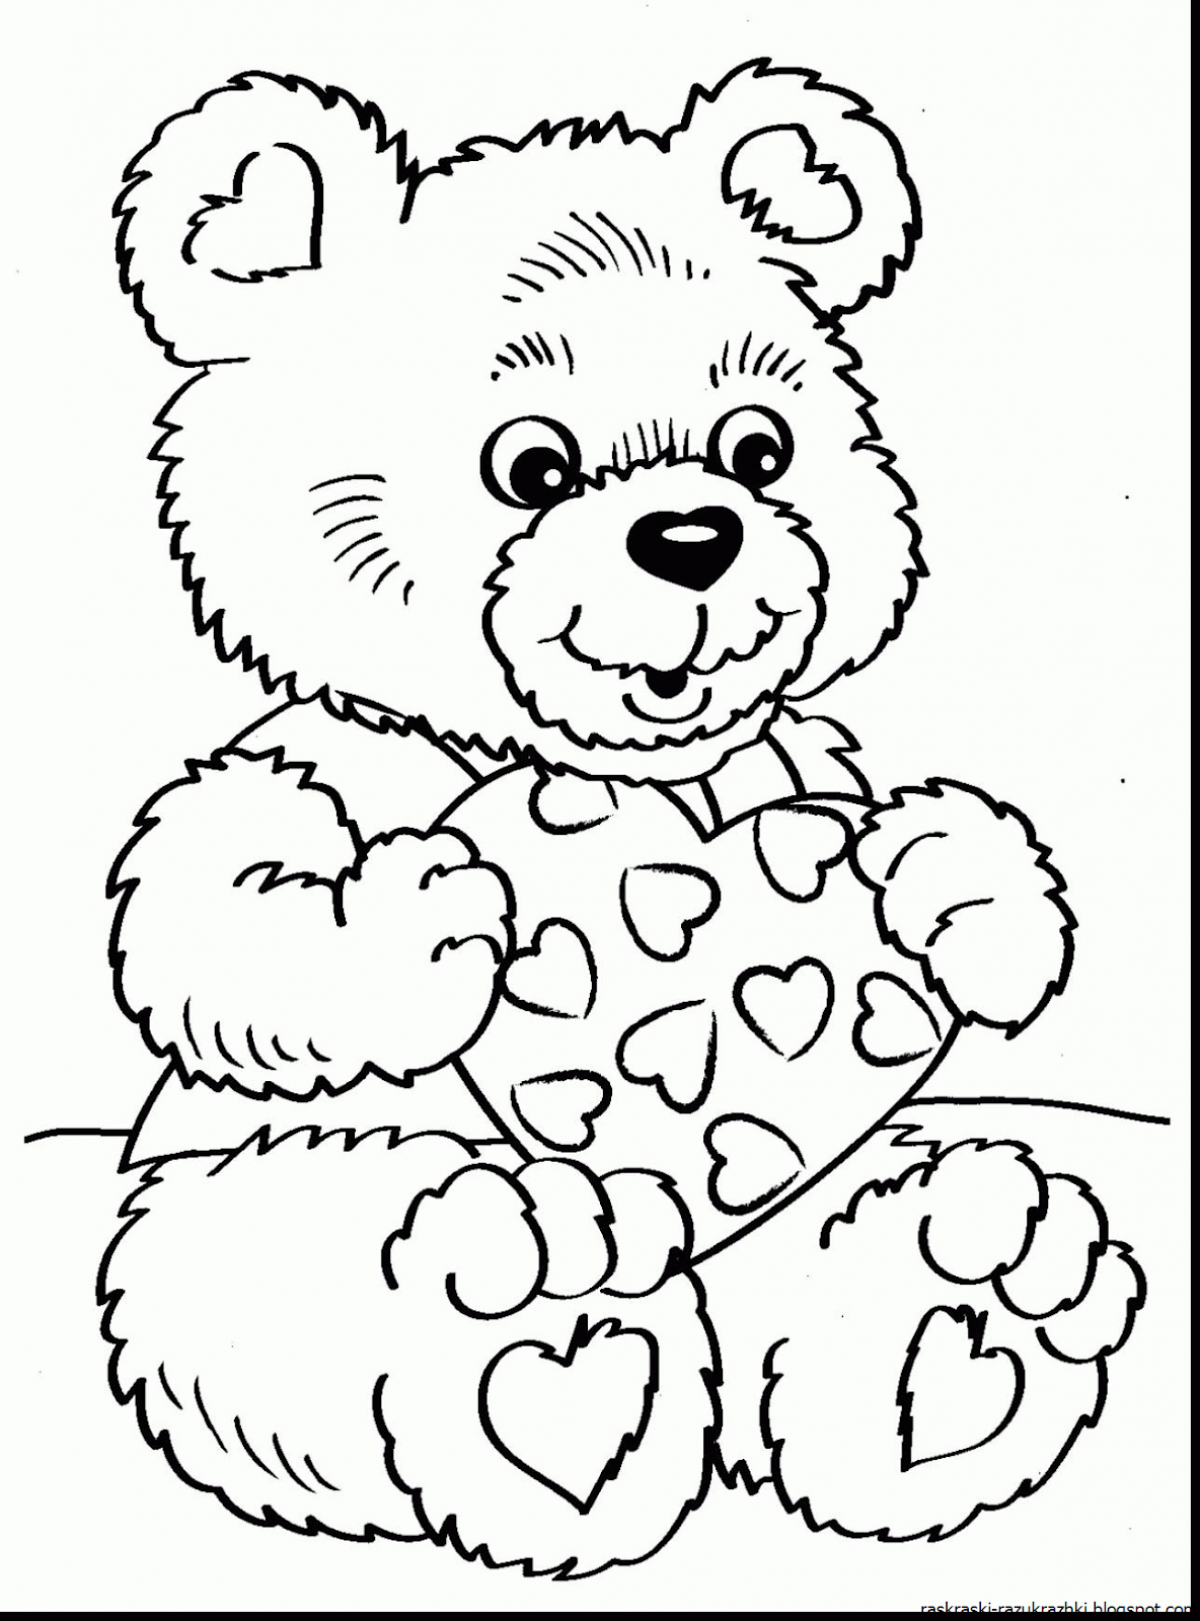 Teddy bear live coloring for children 5-6 years old